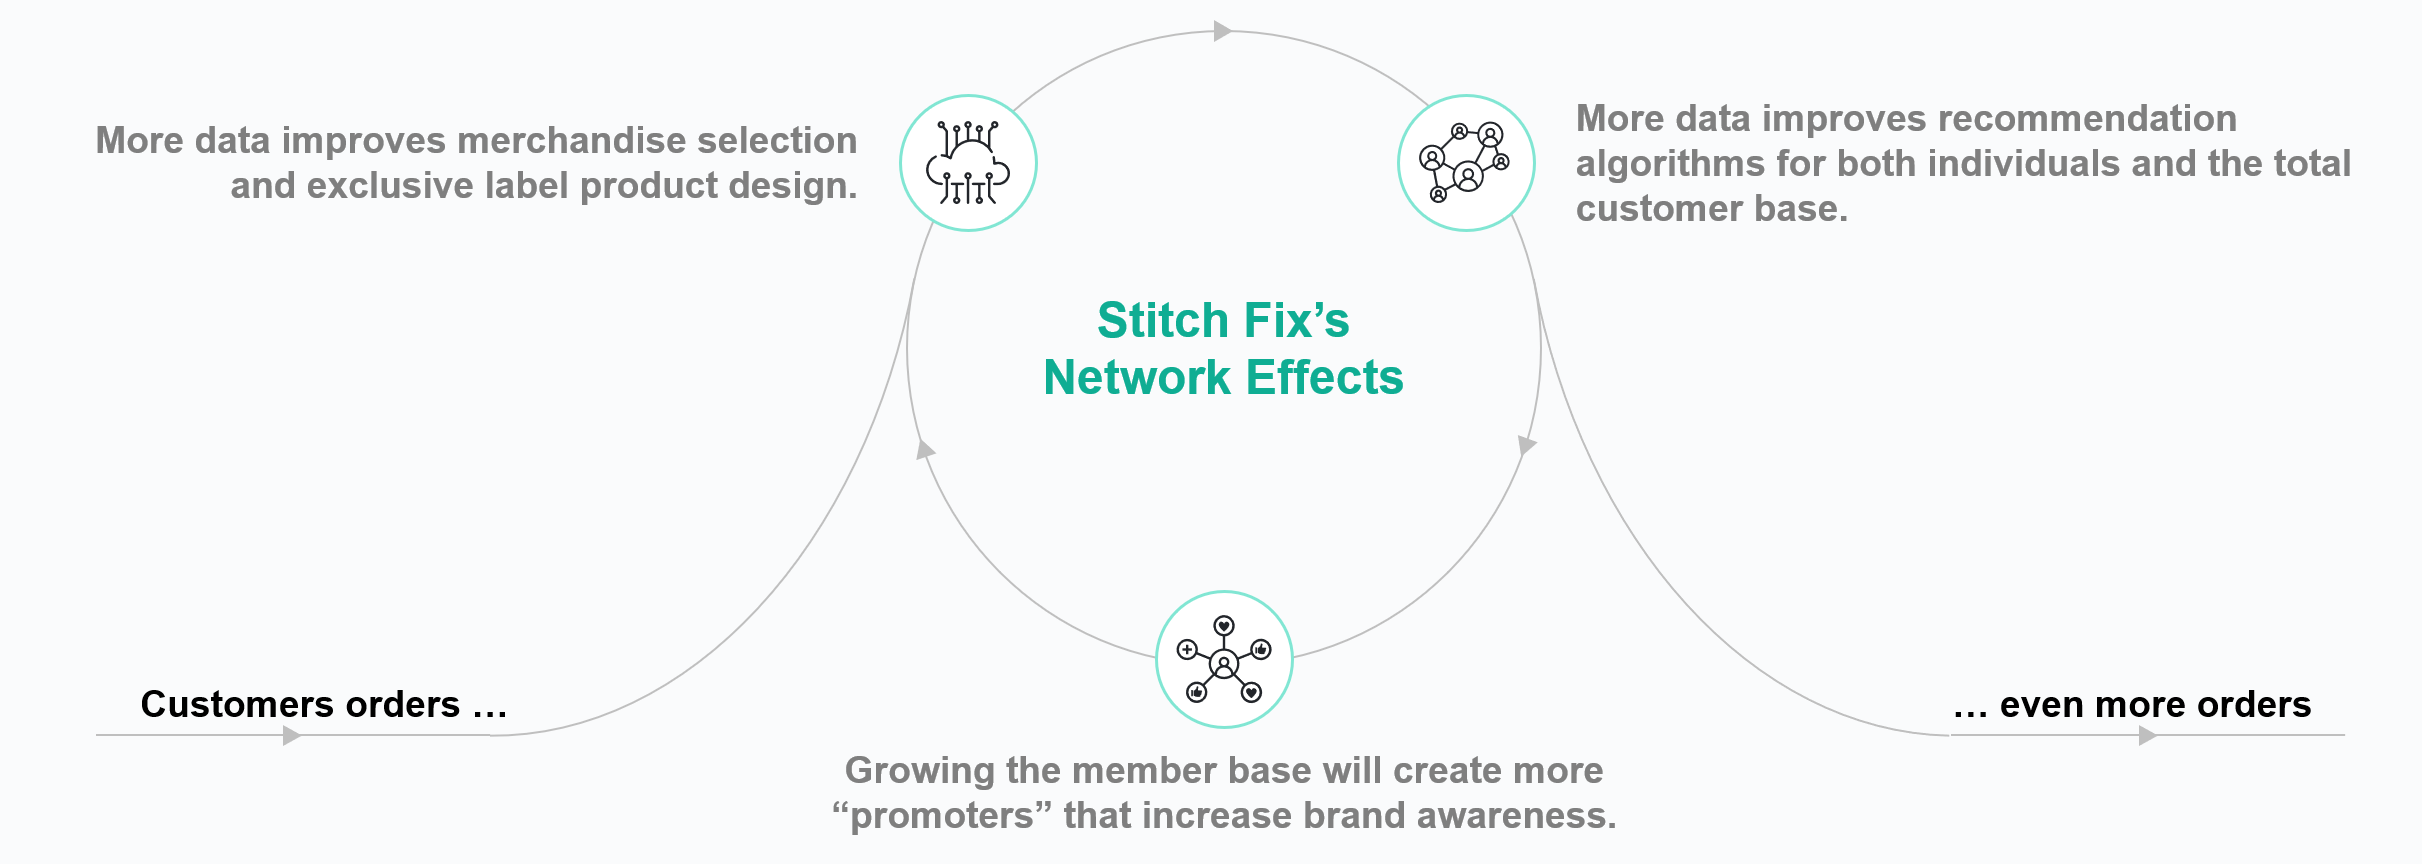 Stitch Fix Chief Merchant: The Style Forecast is 'an Embodiment' of the  Brand Promise - Retail TouchPoints